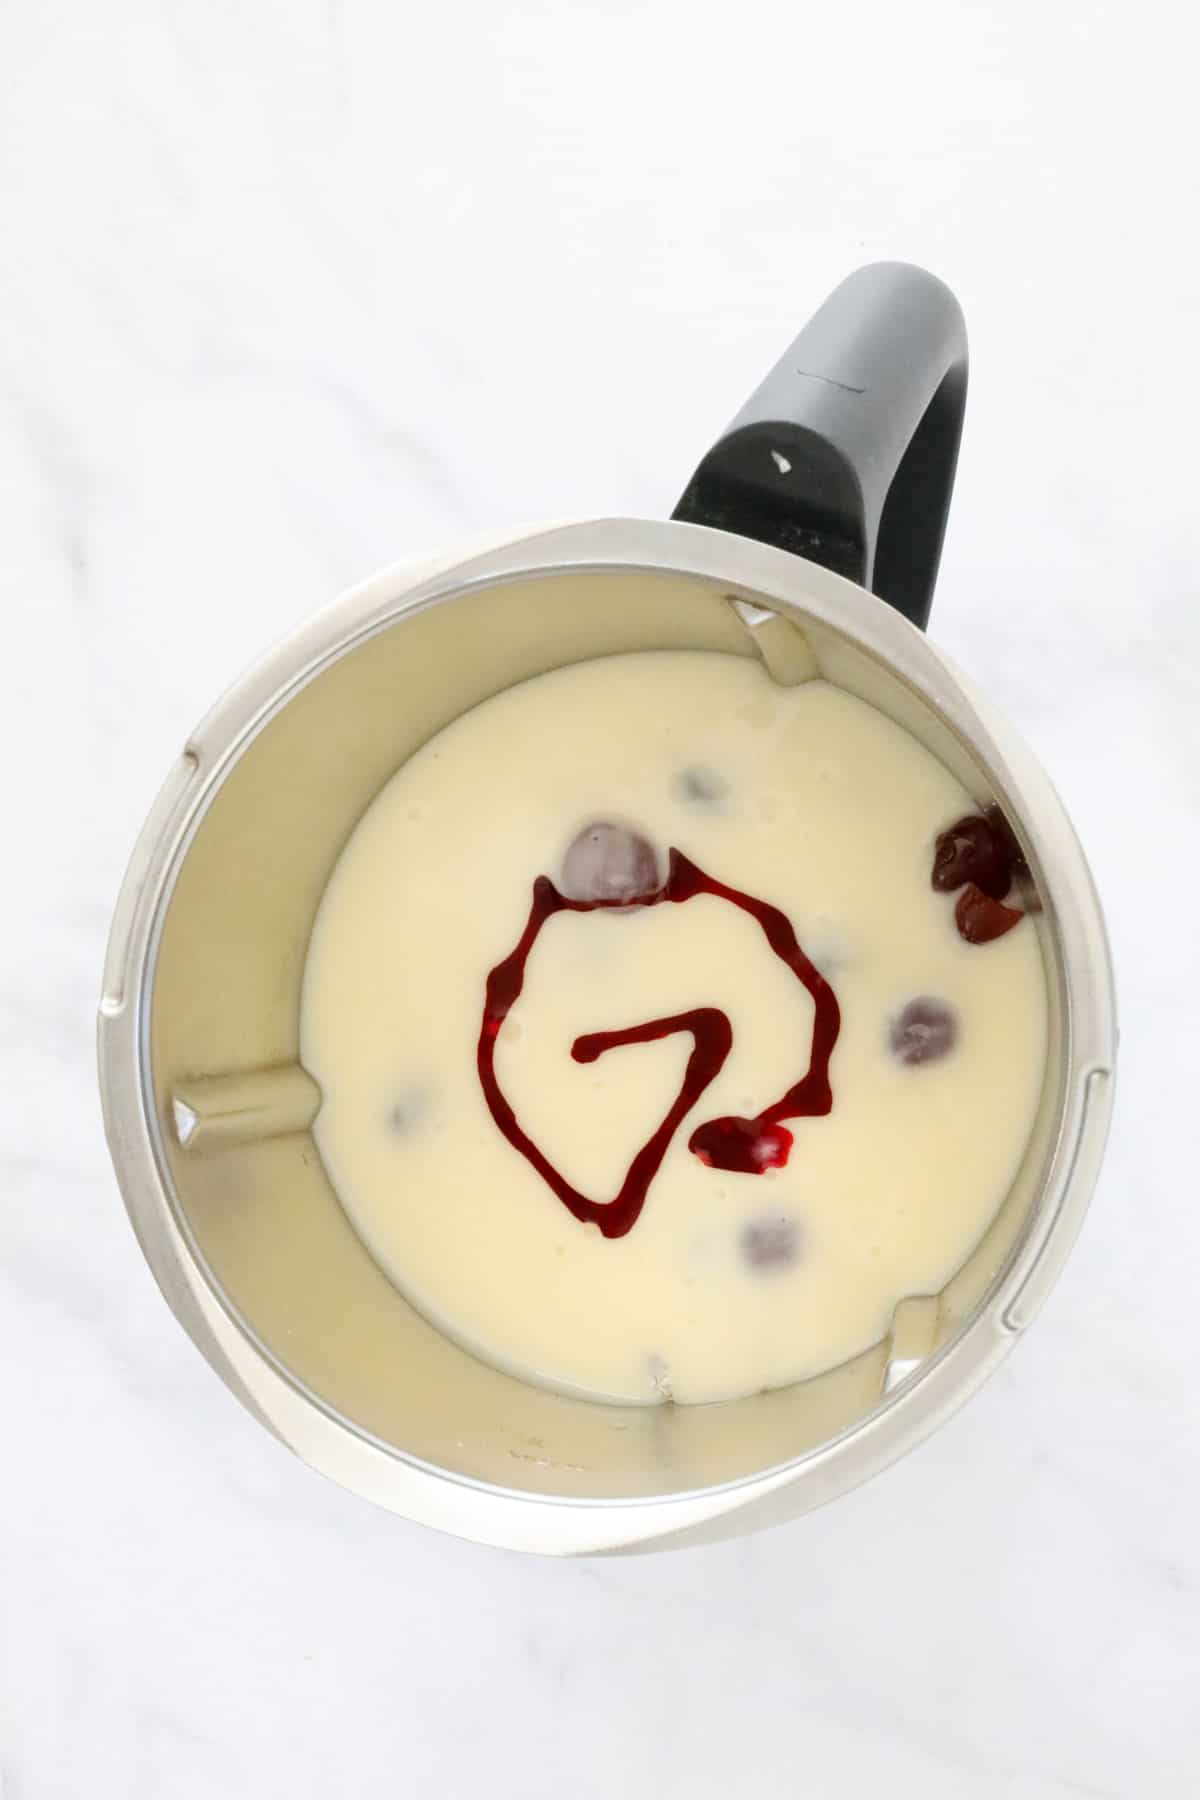 Condensed milk, coconut, glace cherries and red food colouring in the bowl of a Thermomix.